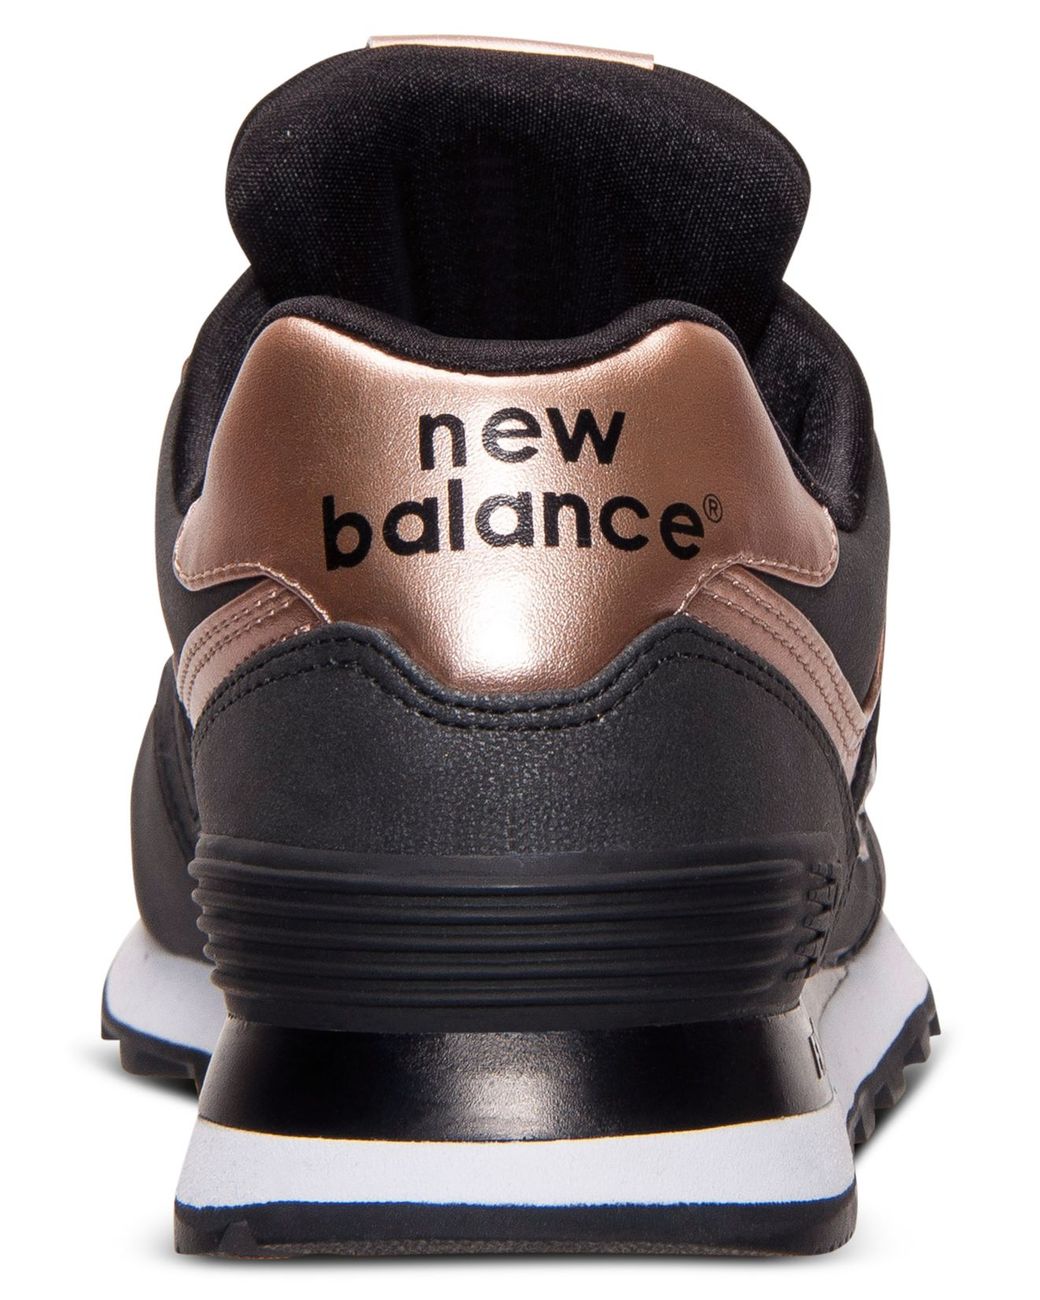 New Balance 574 Metals Casual Sneakers From Finish Line in Metallic | Lyst